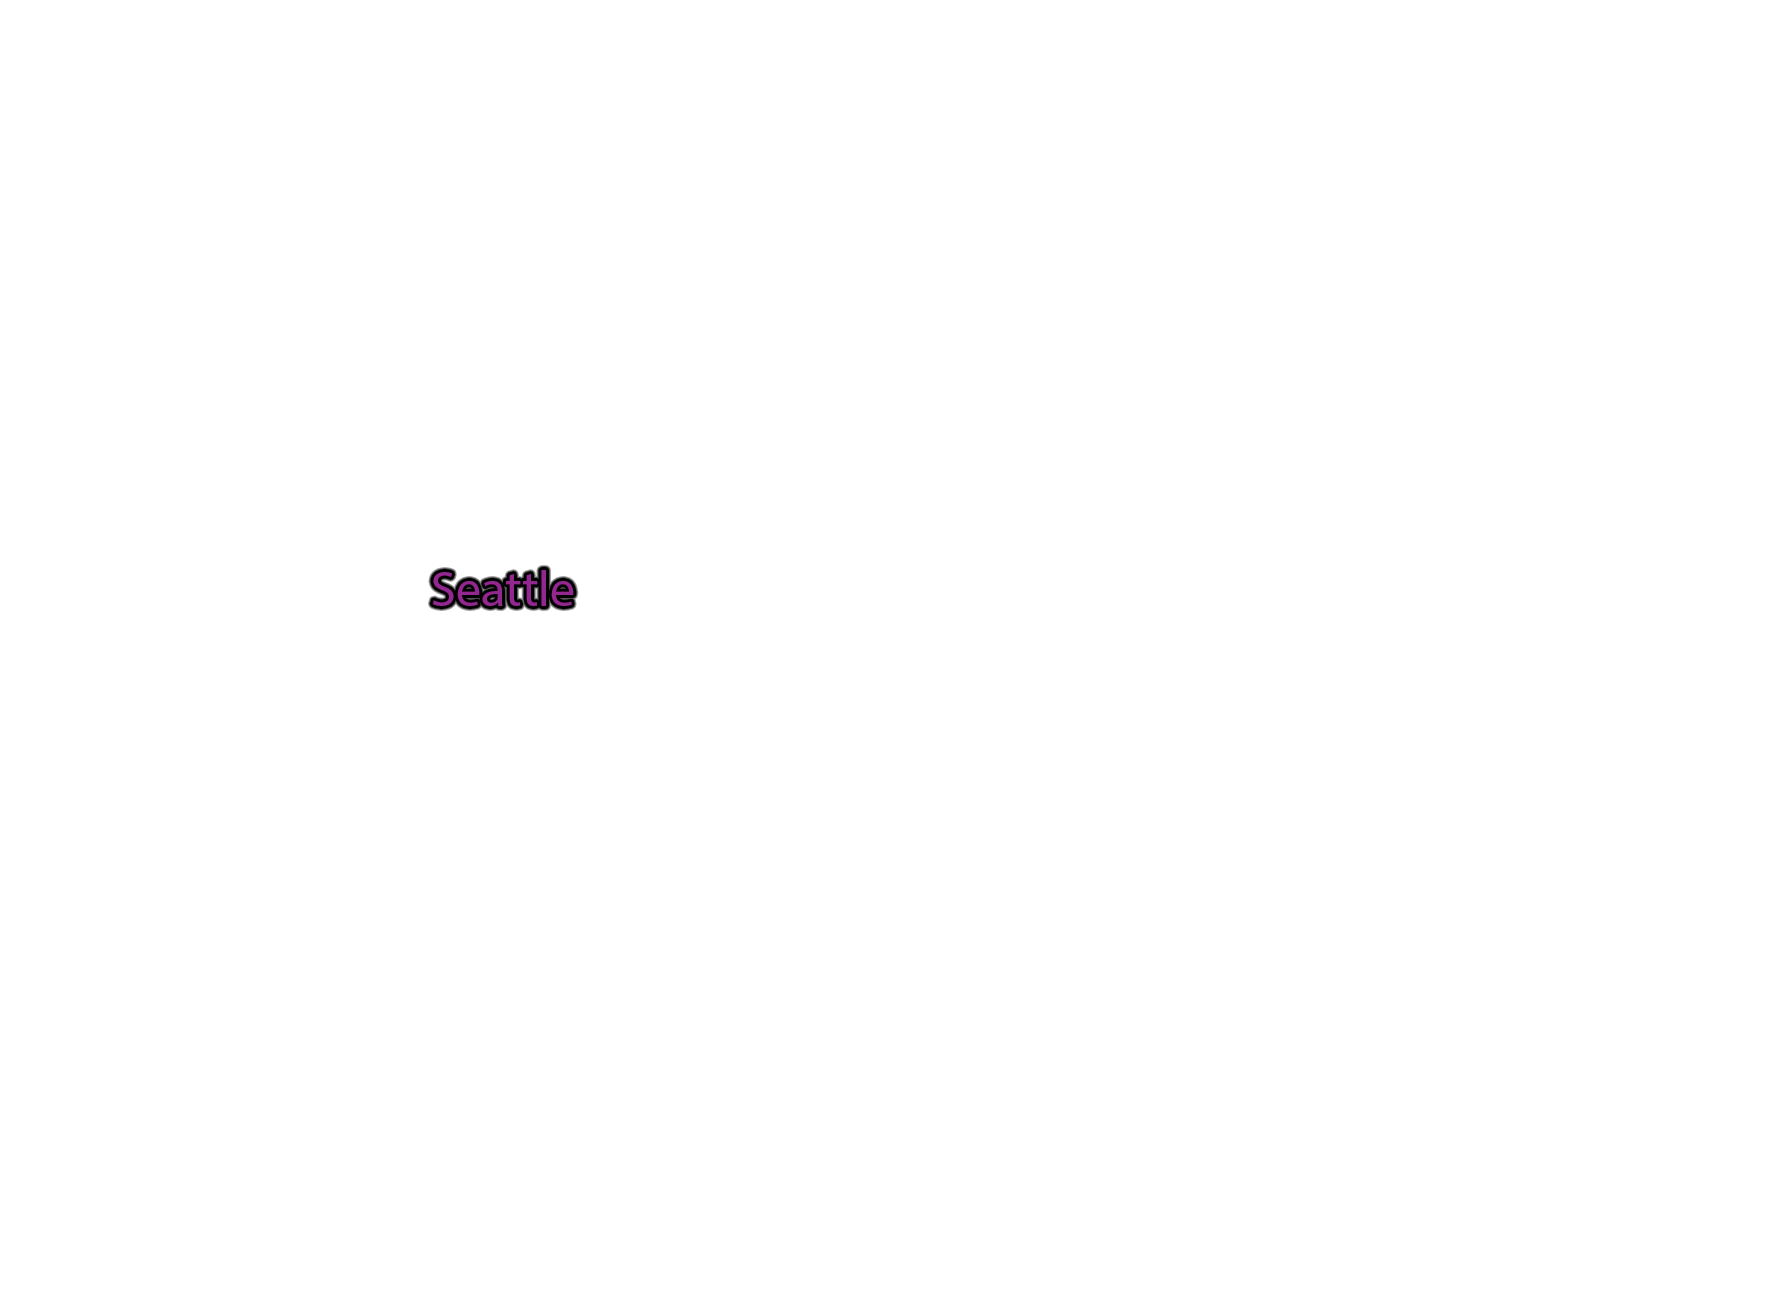 Seattle label with glow